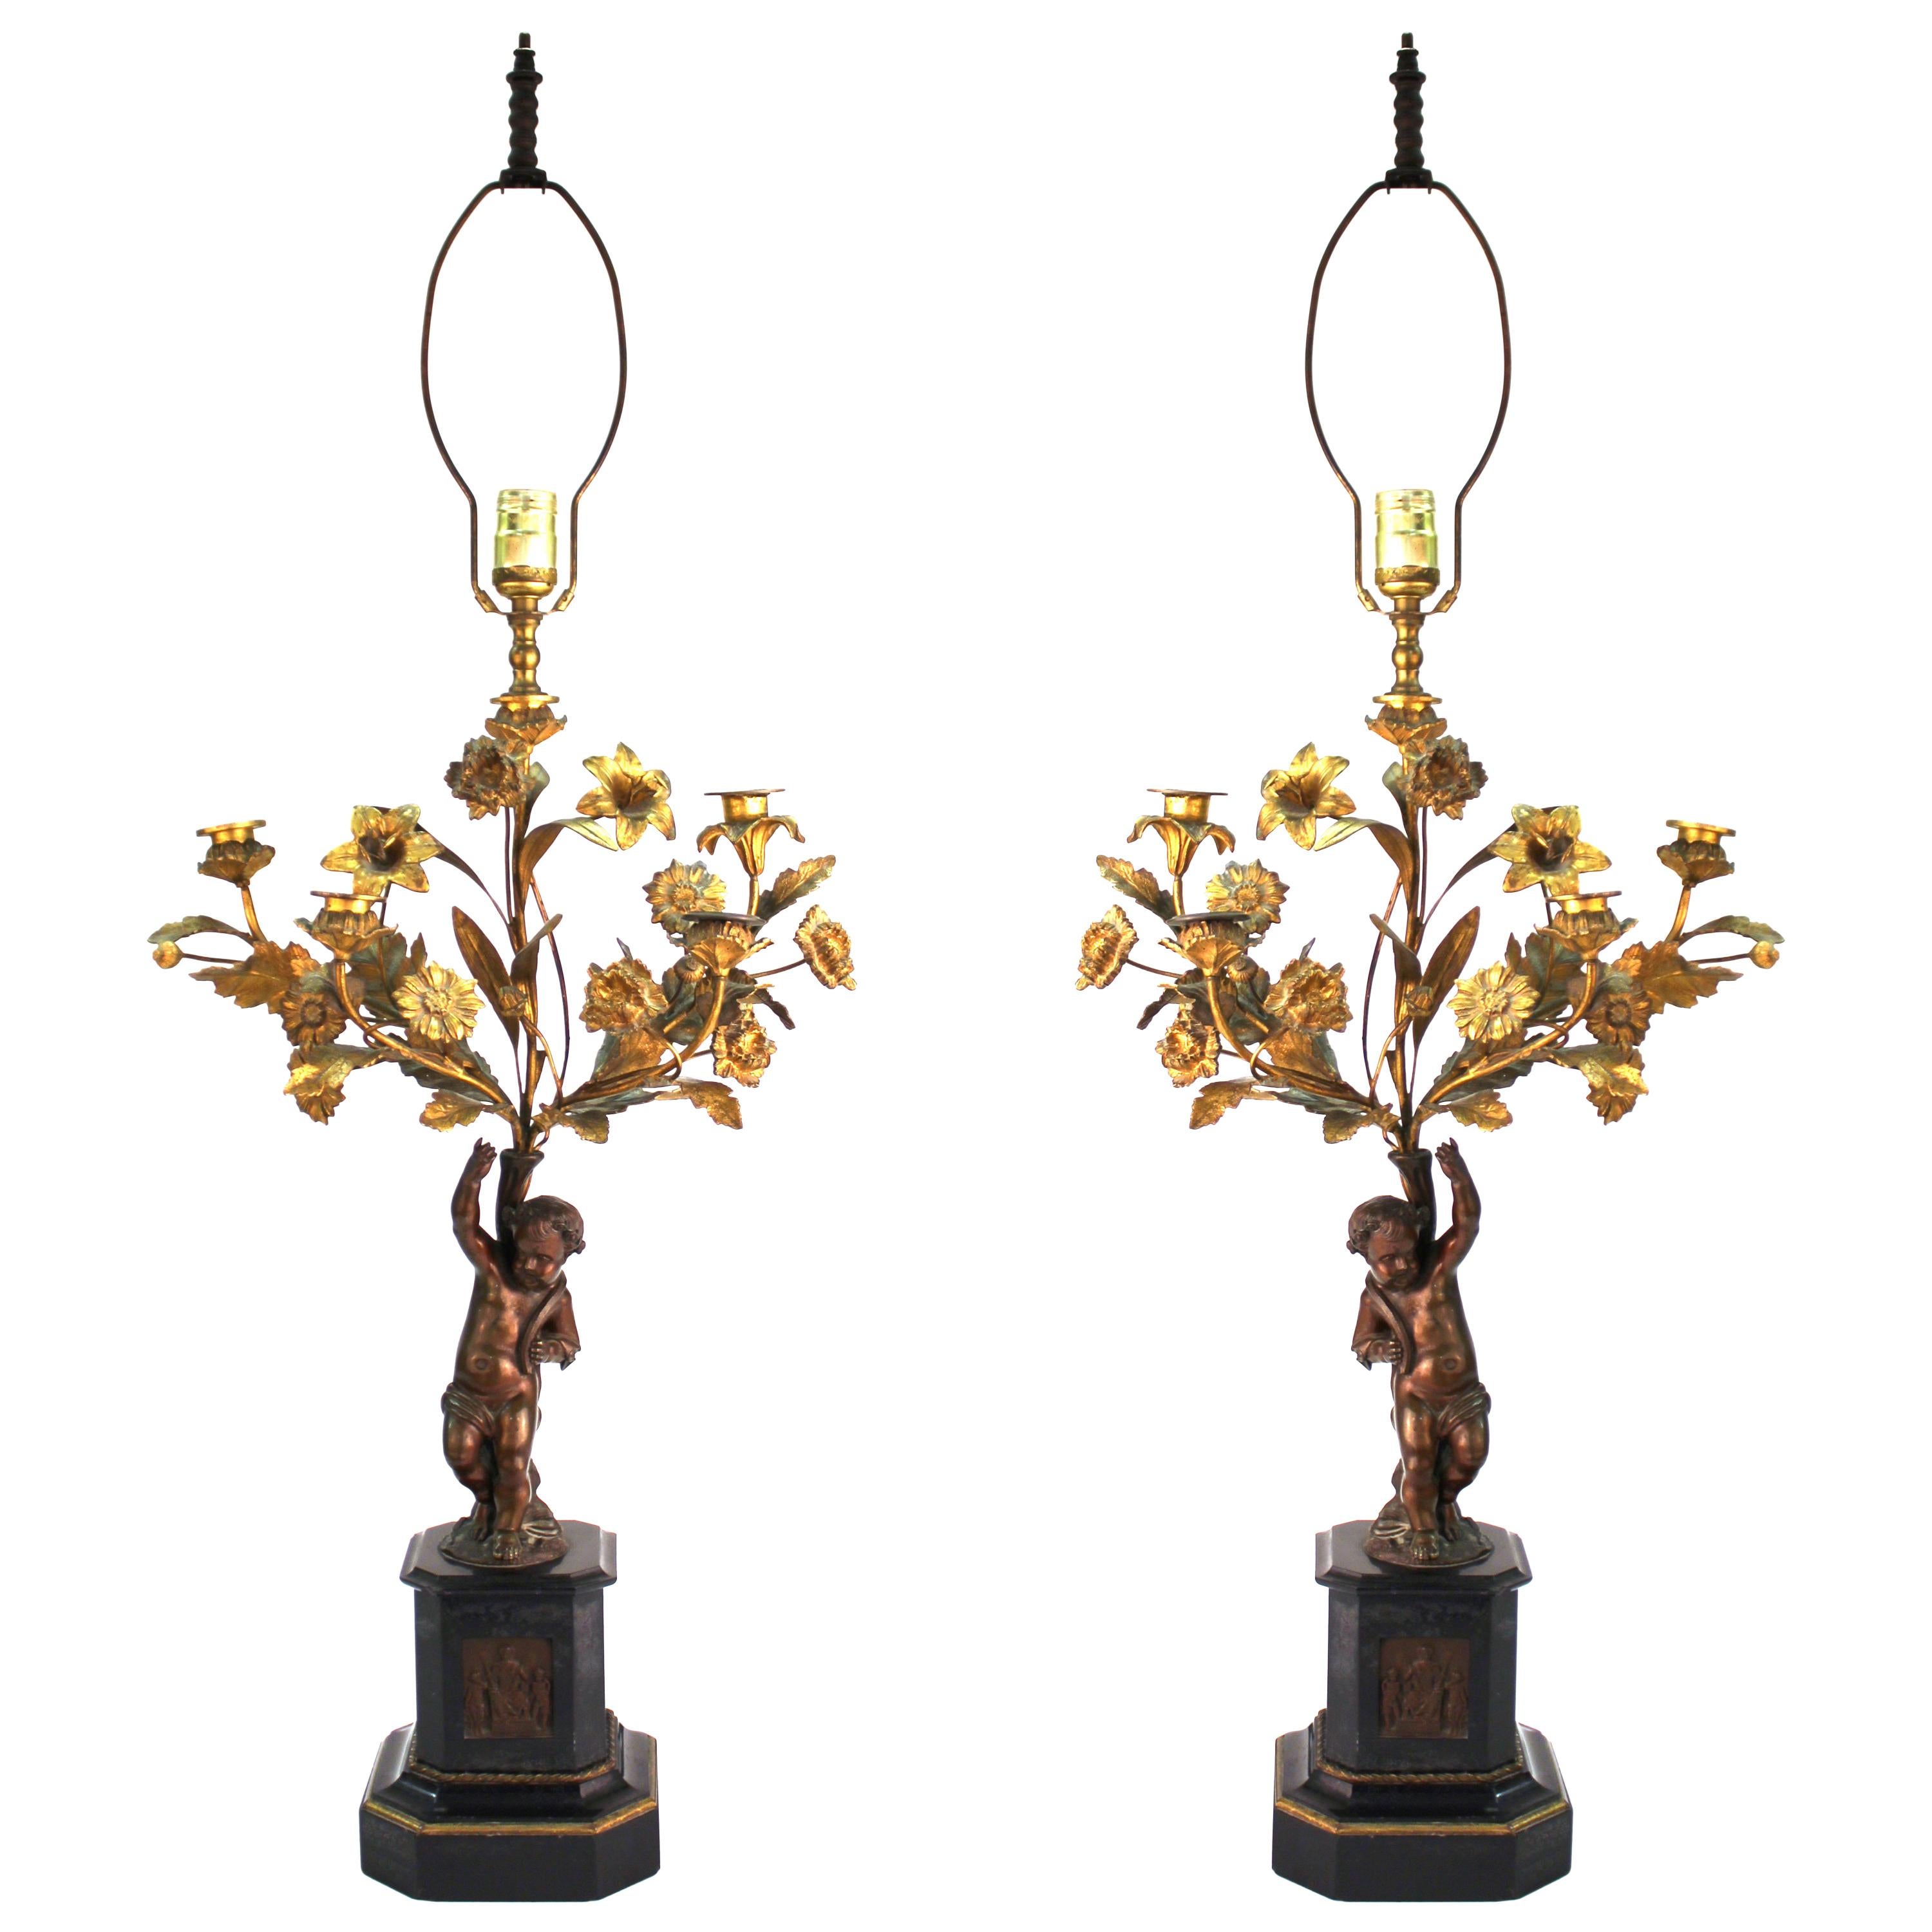 French Neoclassical Revival Bronze Table Lamps with Putti